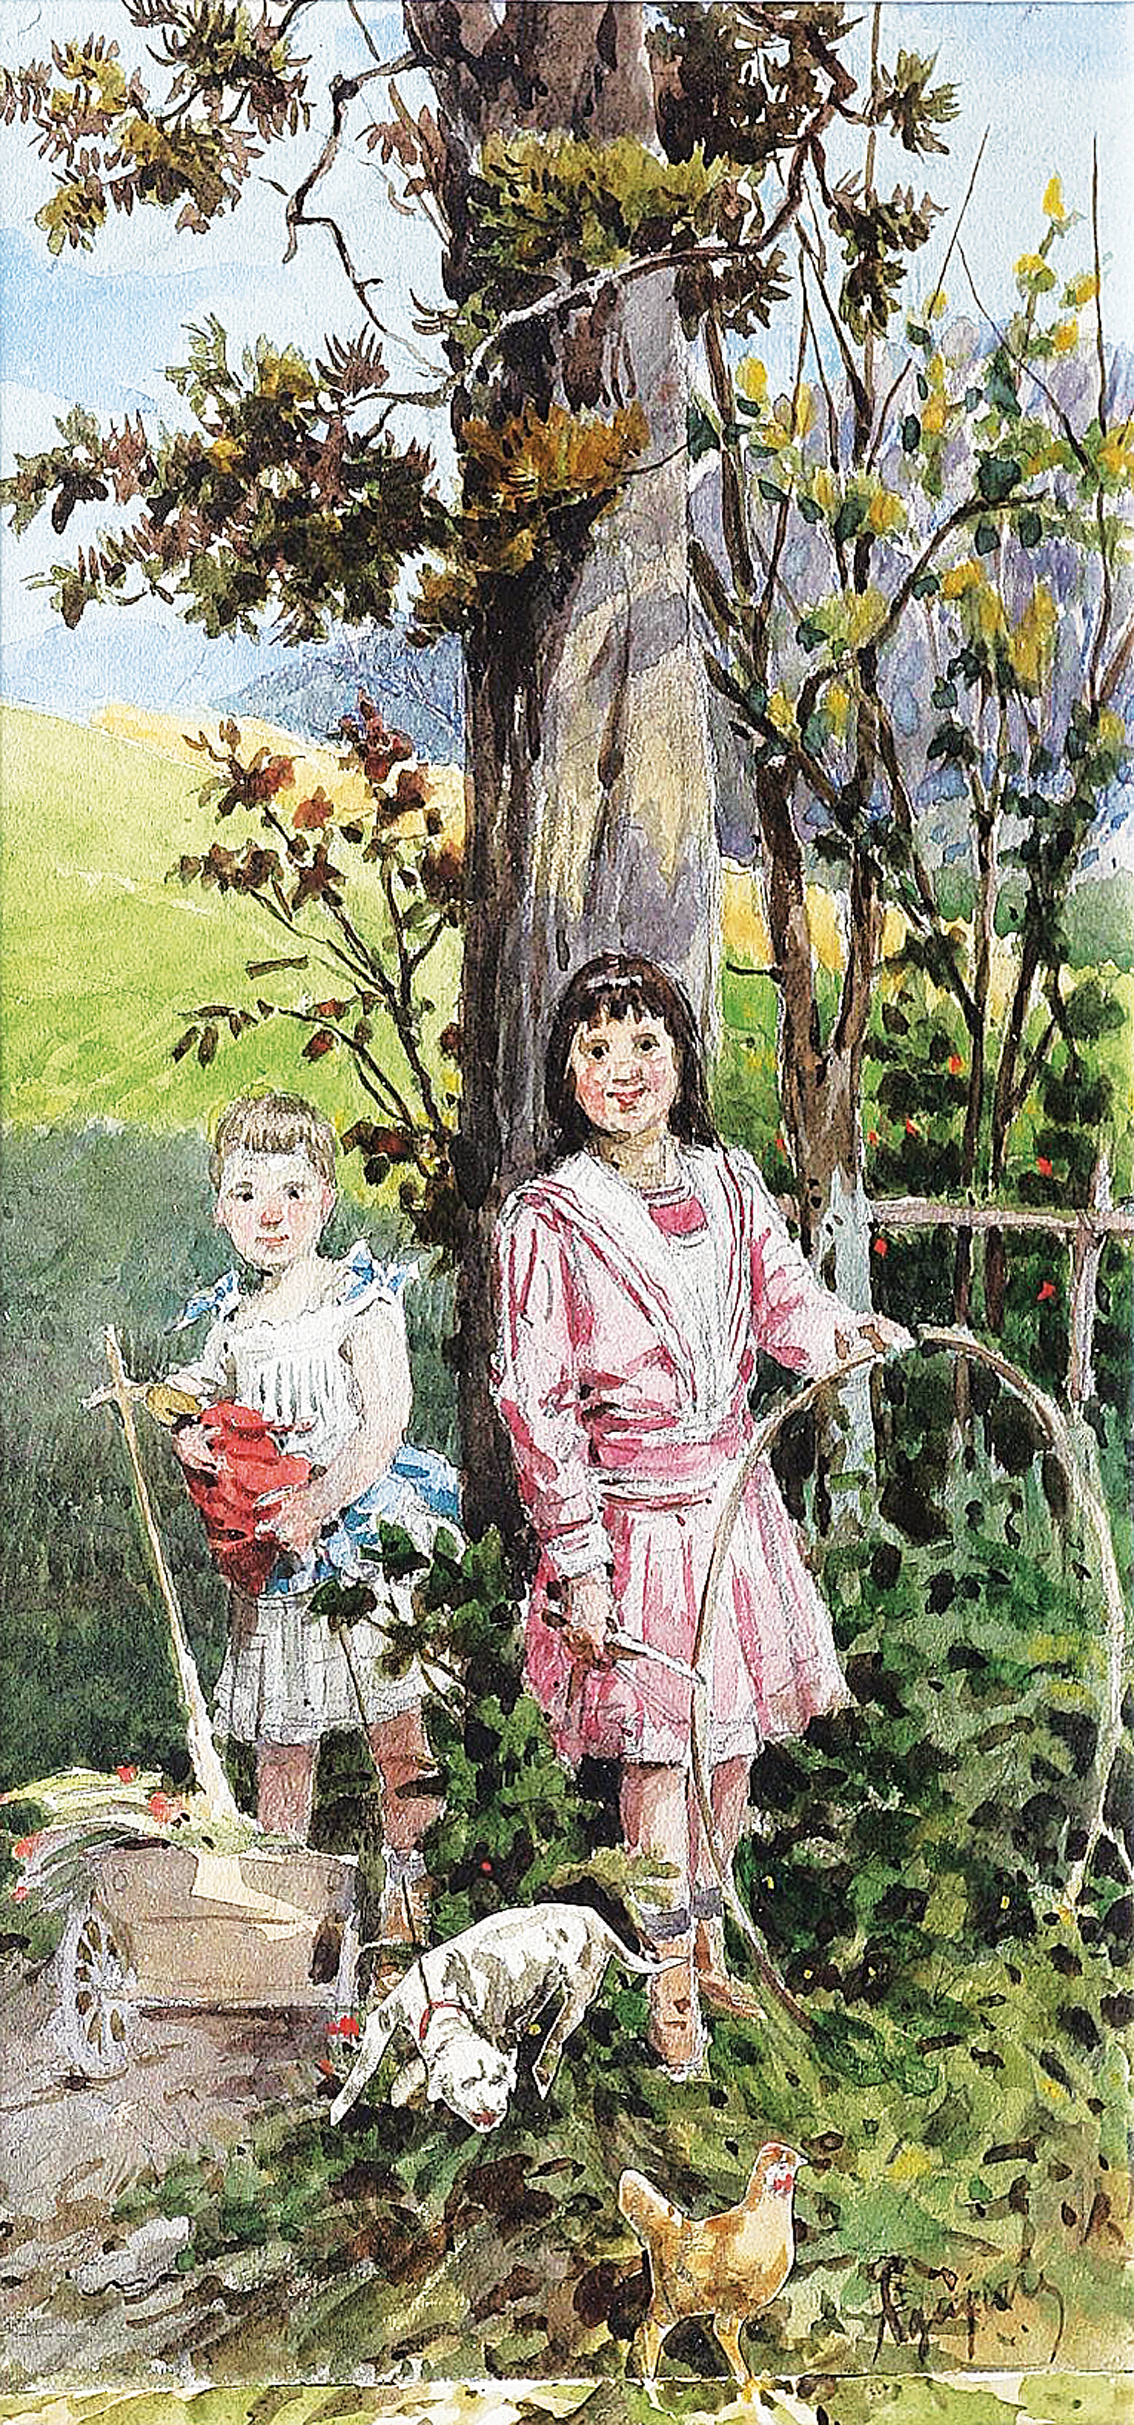 Two girls playing in a wooded landscape